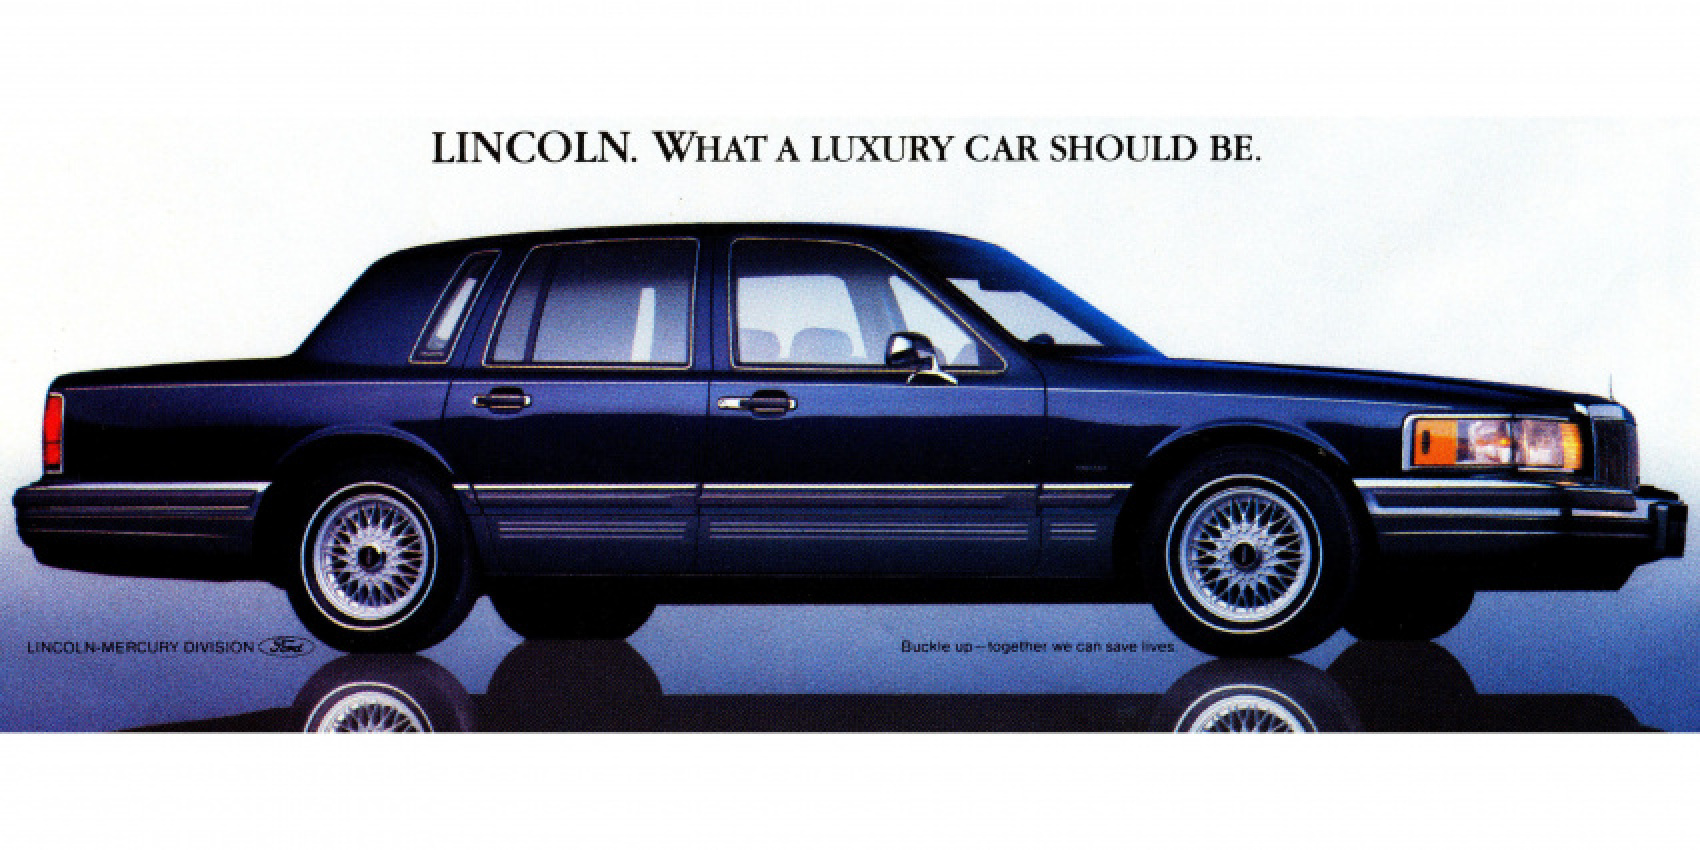 autos, cars, classic cars, lincoln, lincoln town car gets revamped for 1990, takes home big prize